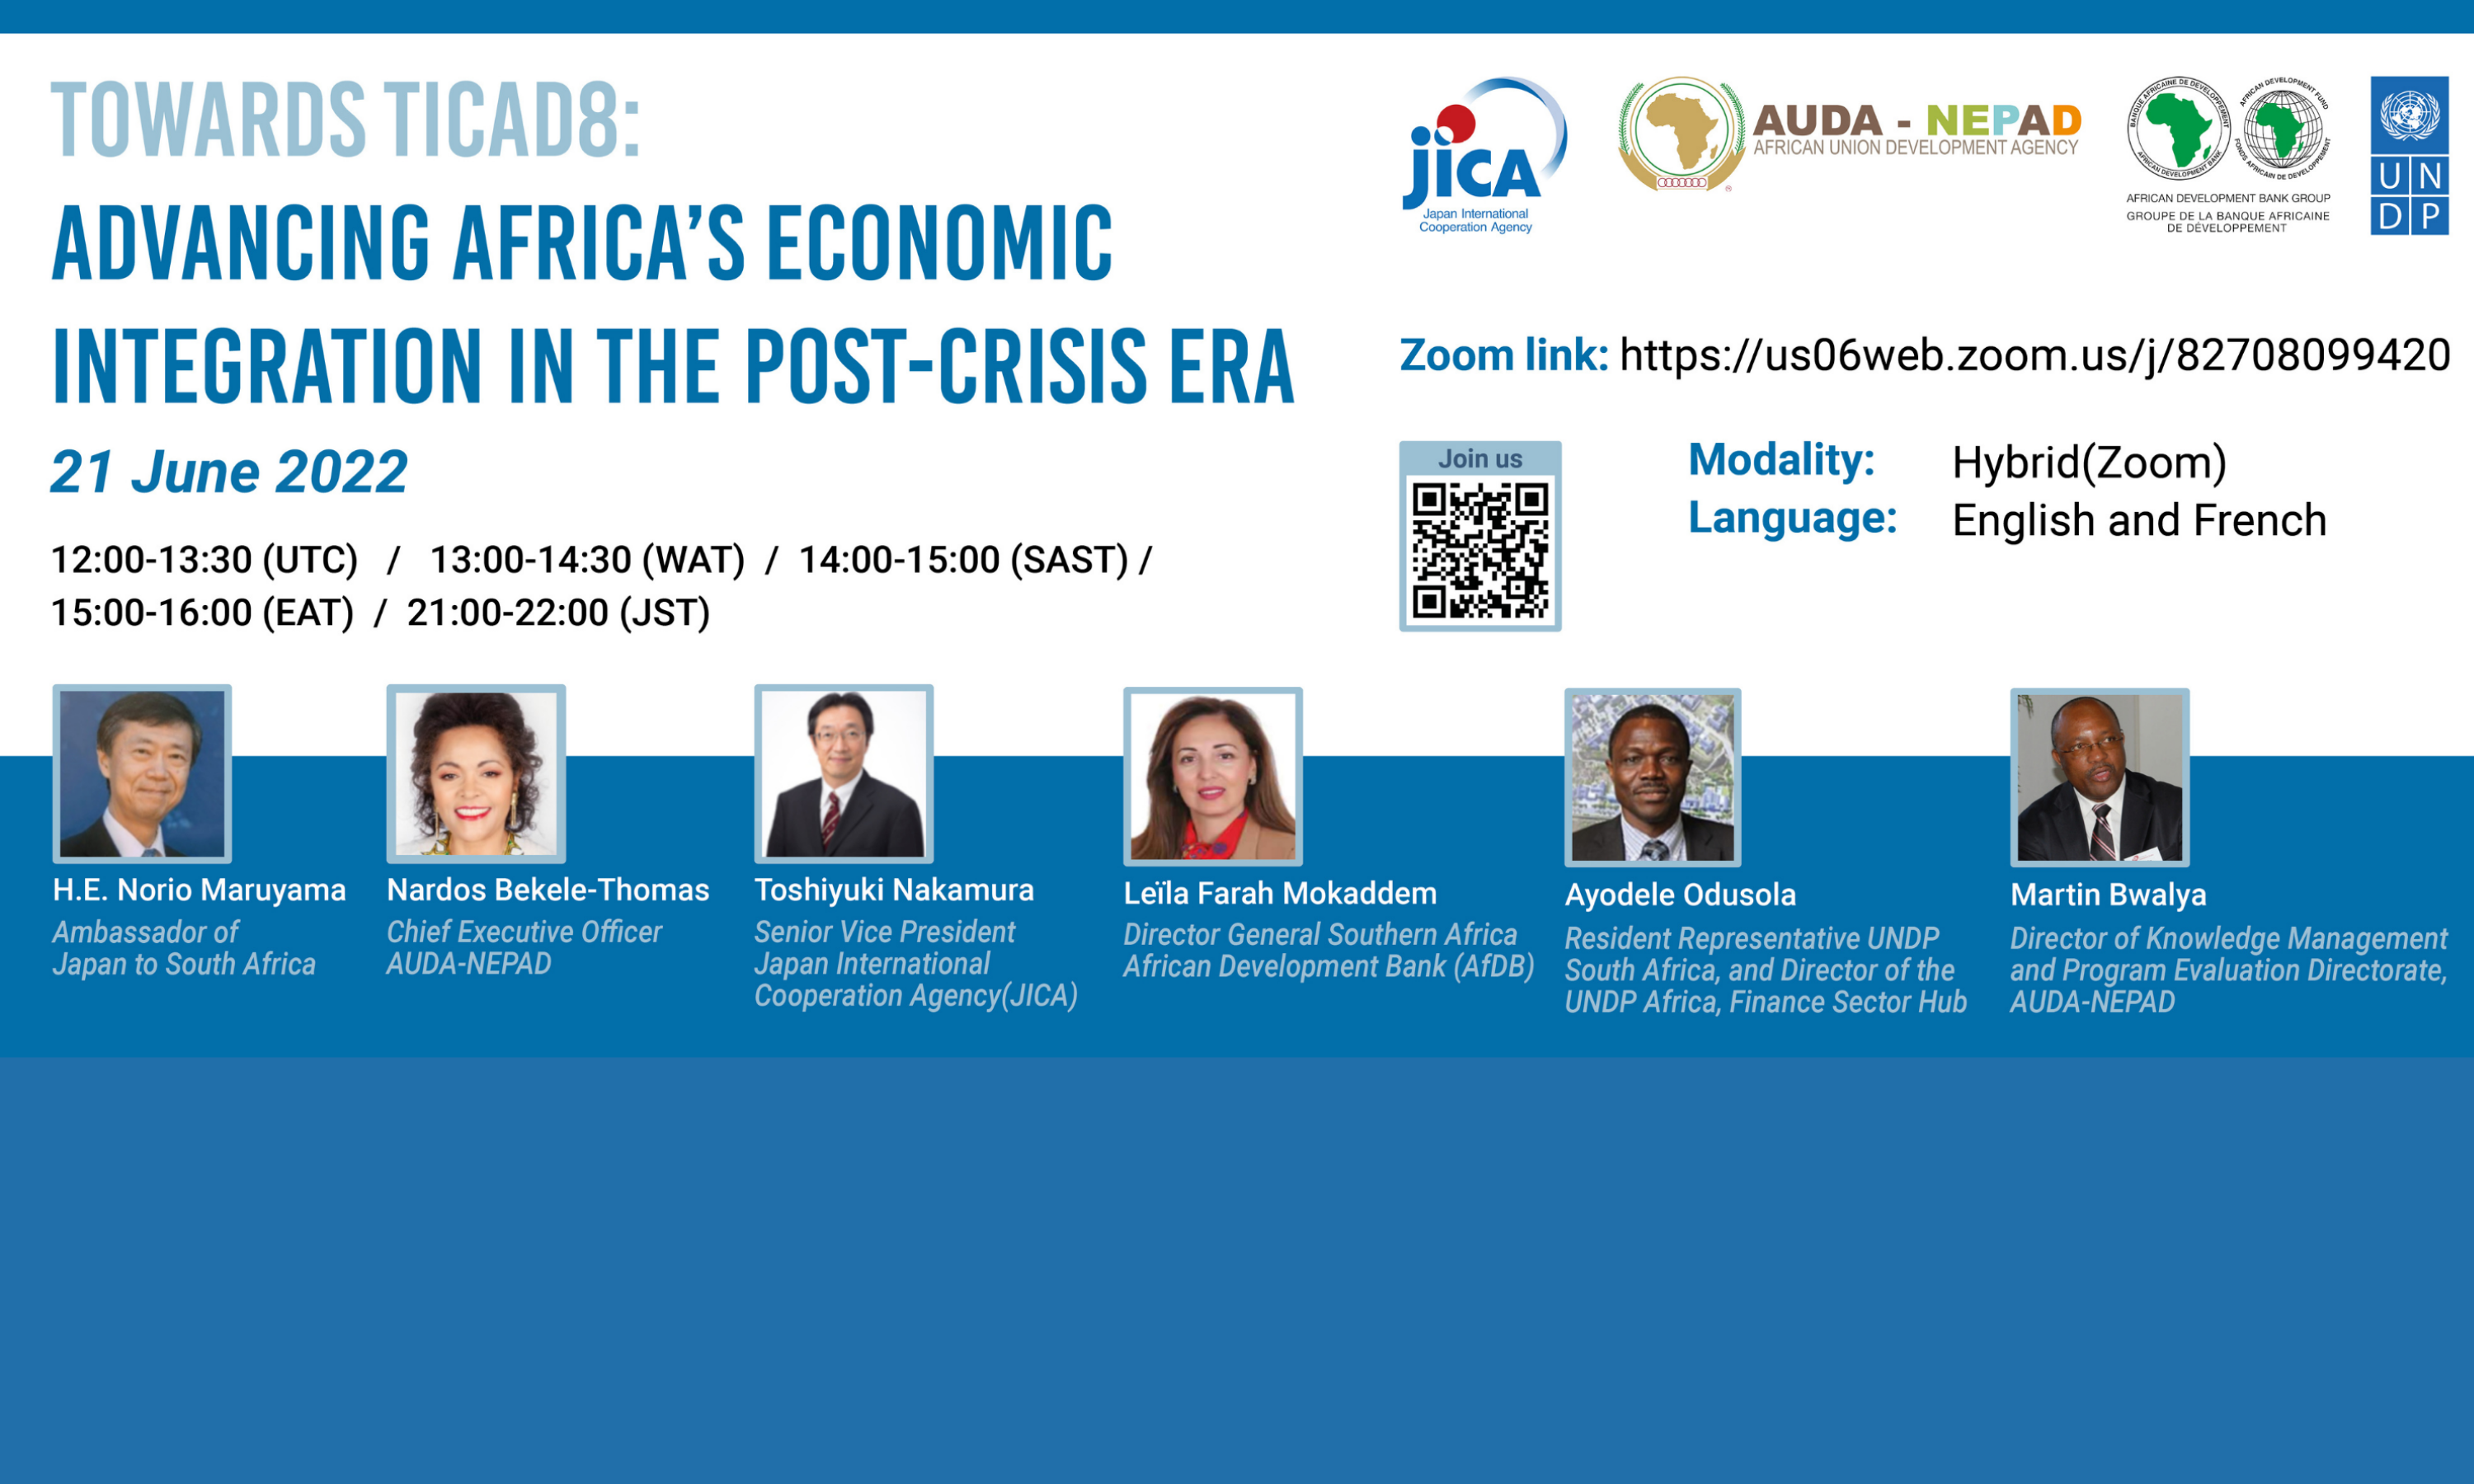 The high-level event to discuss the path for African economic integration and how TICAD8 can help. 